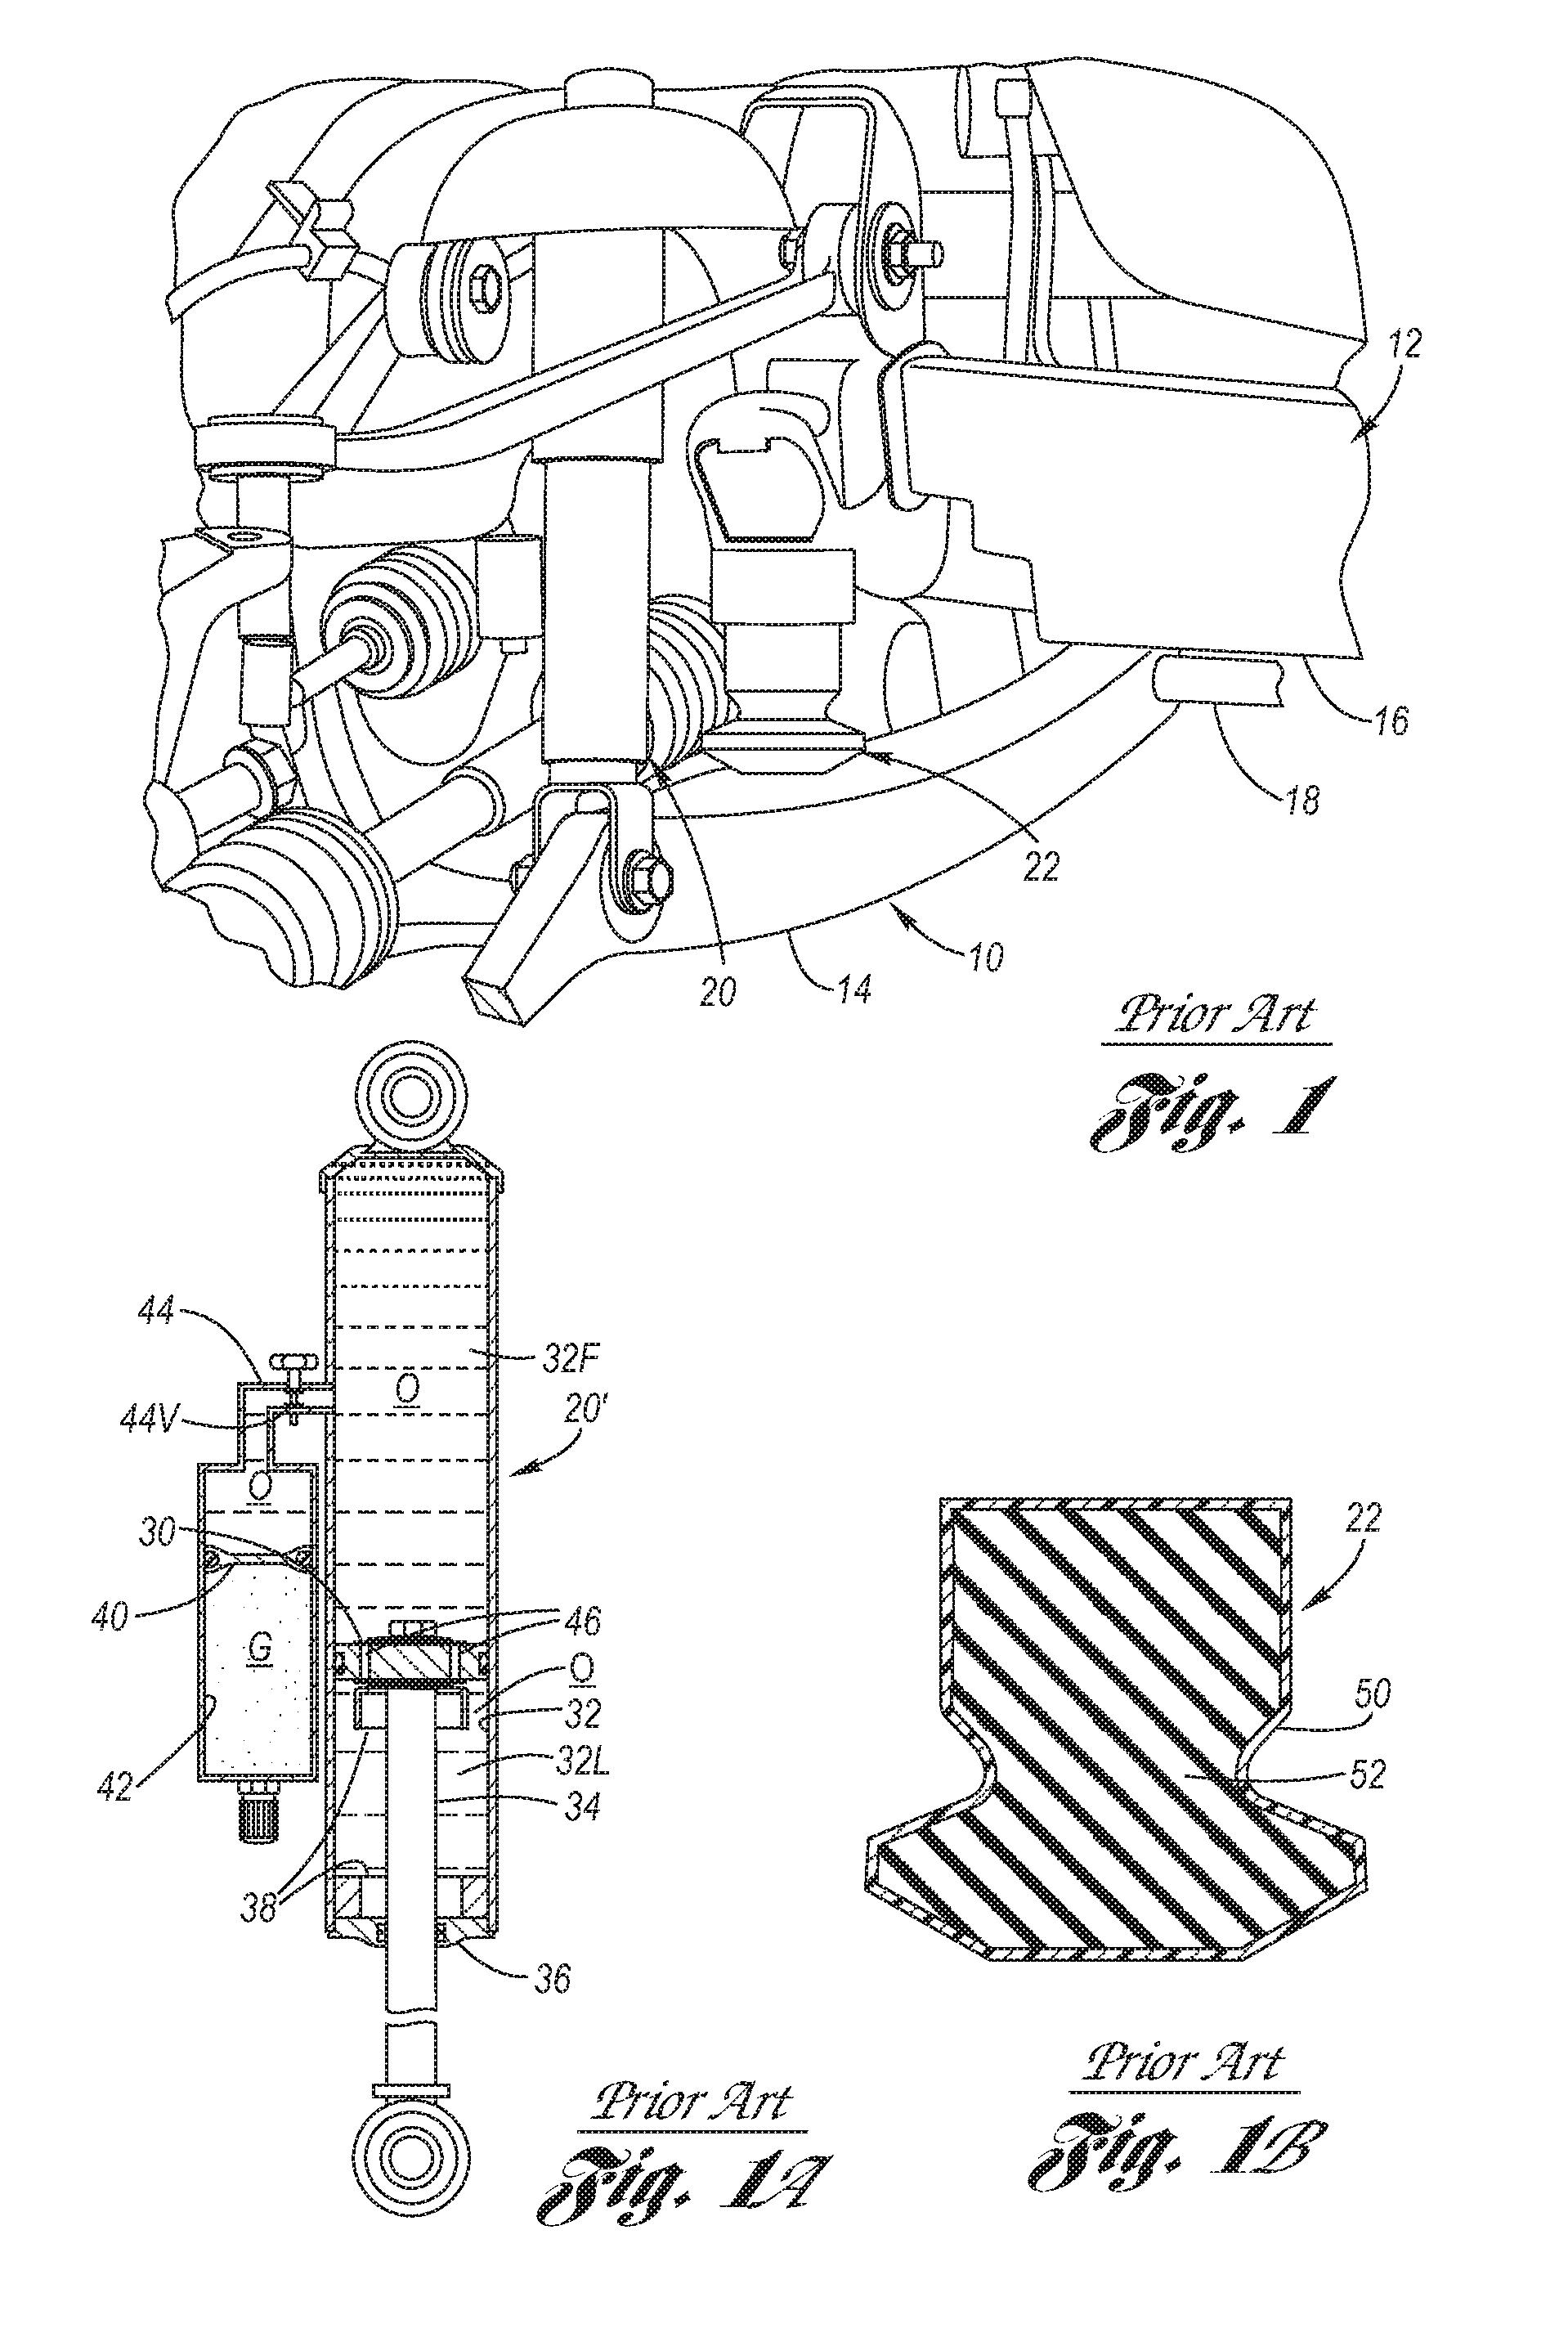 Suspension system with optimized damper response for wide range of events